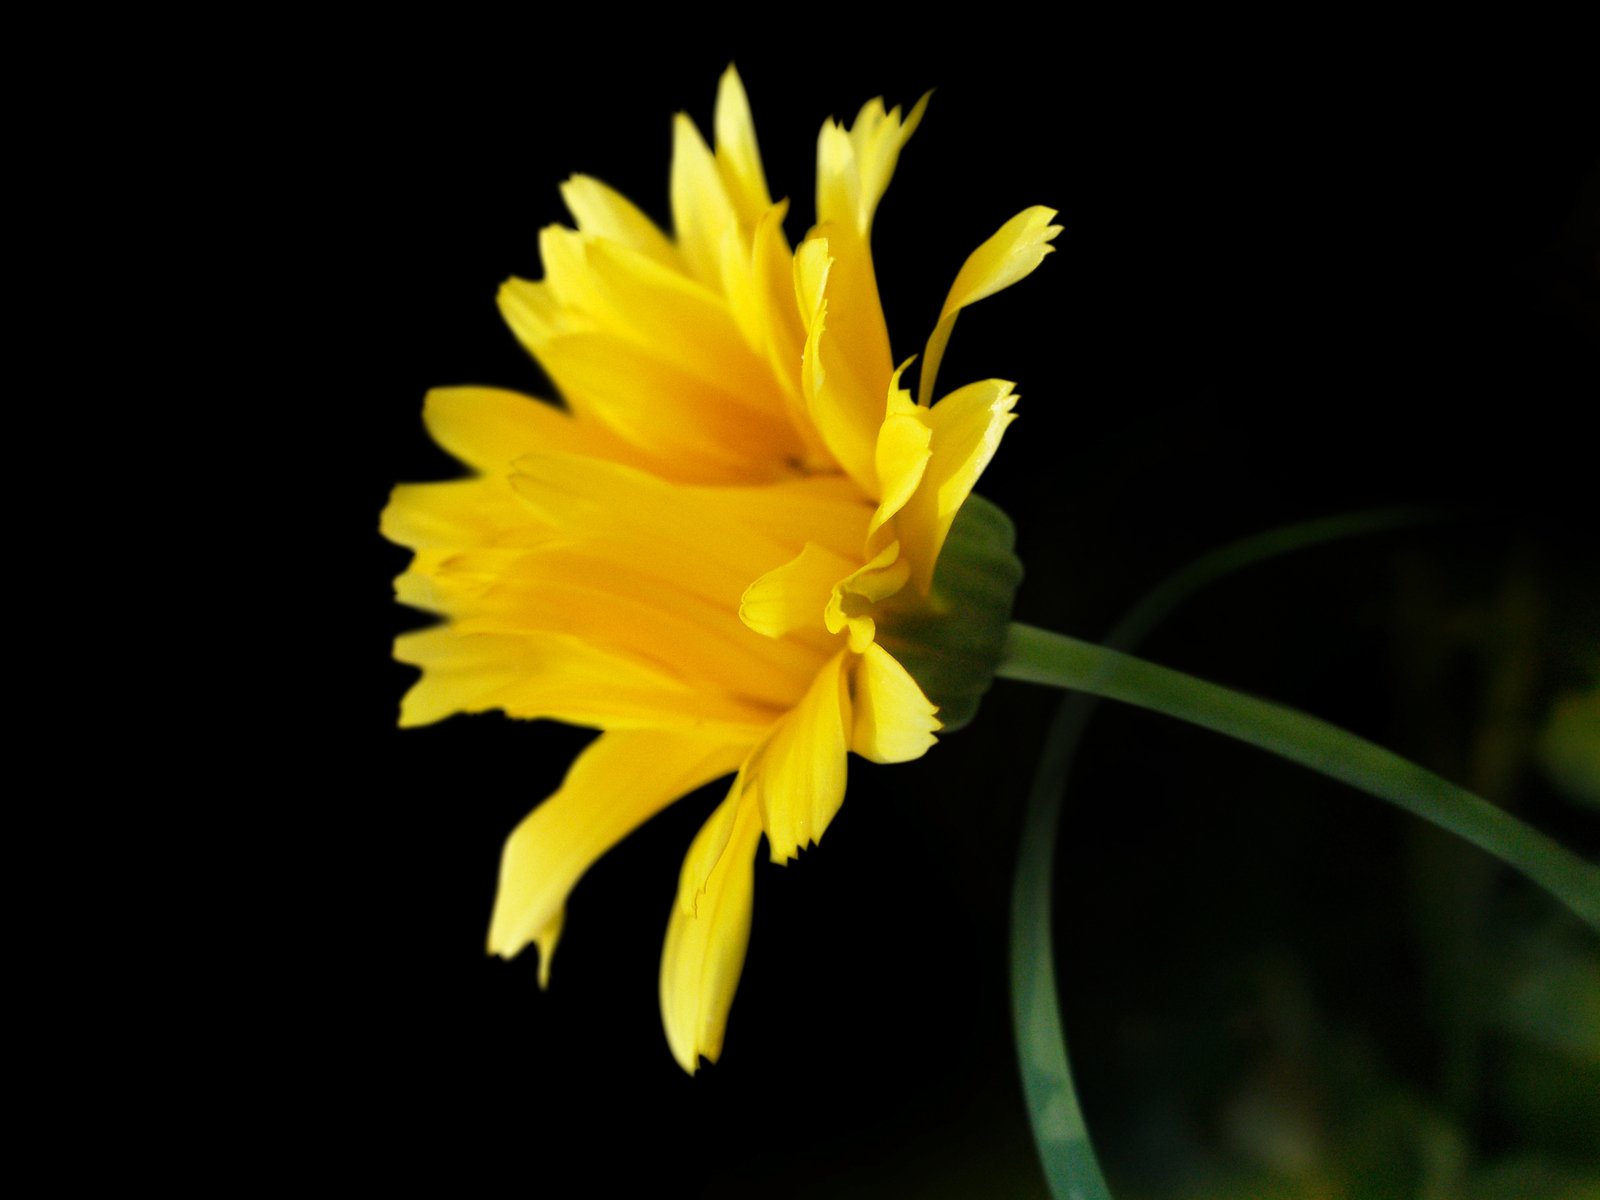 a yellow flower sits on the stem of green stems